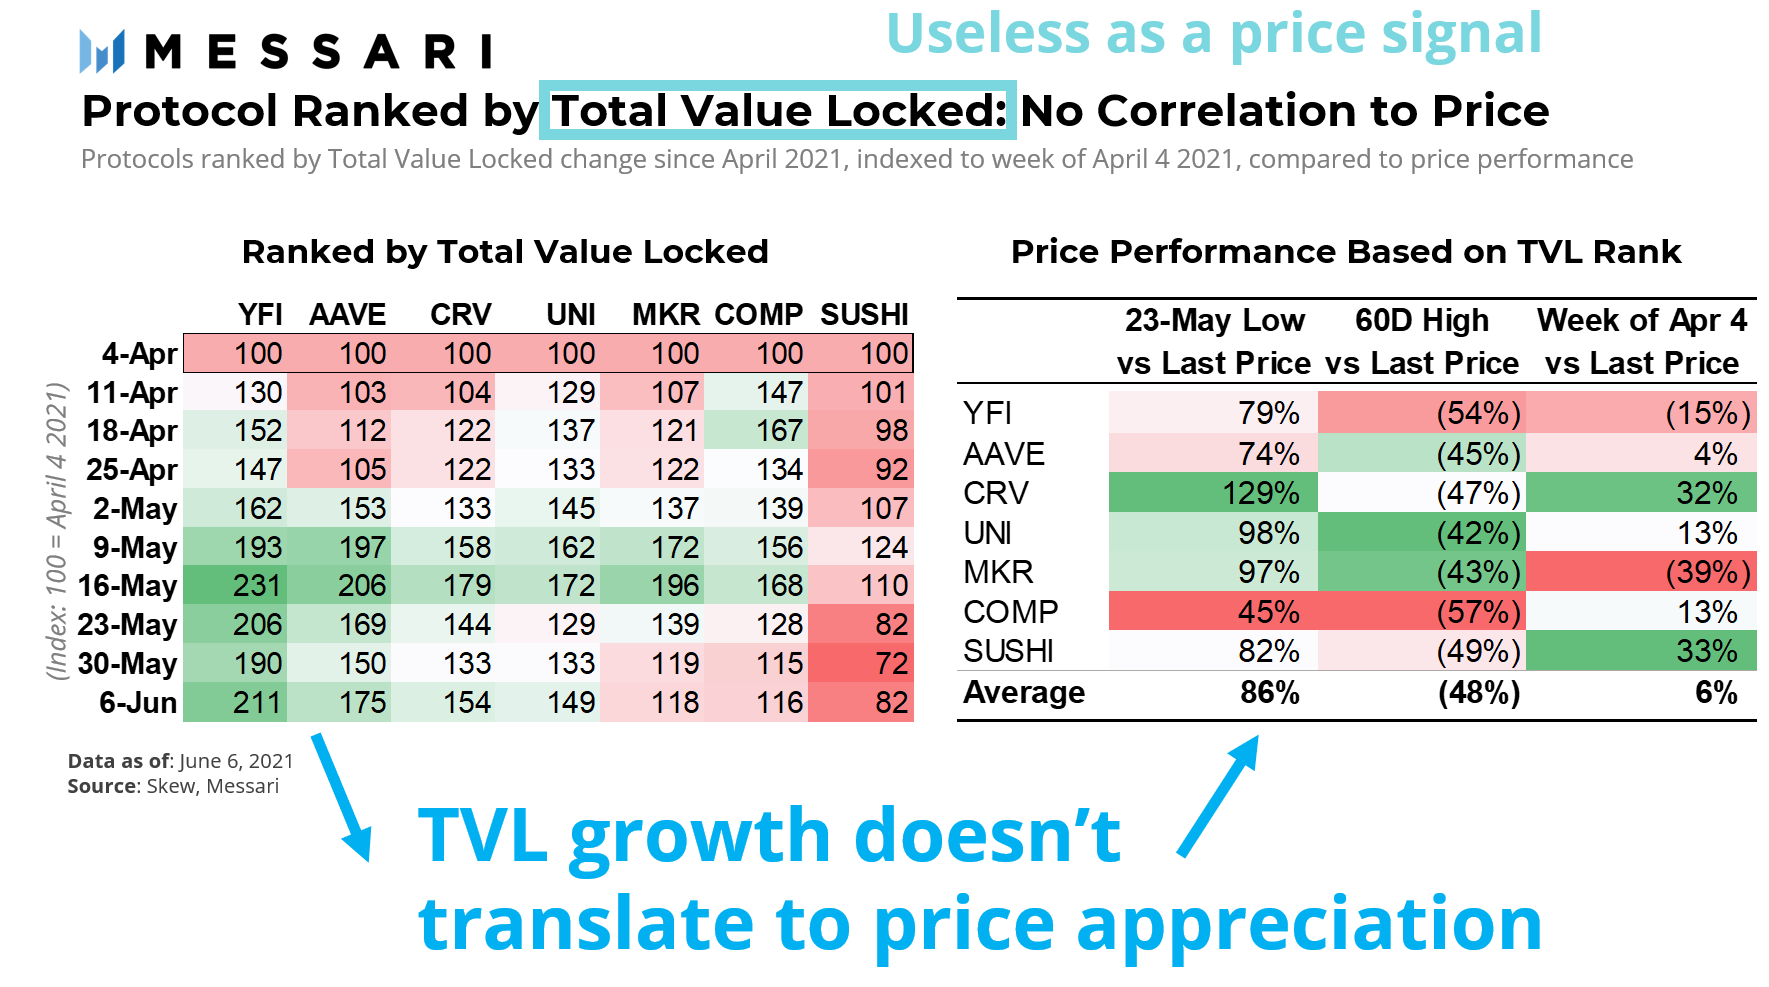 Protocol Ranked by Total Value Locked: No Correlation to Price. TVL growth doesn’t translate to price appreciation so is Useless as a price signal

